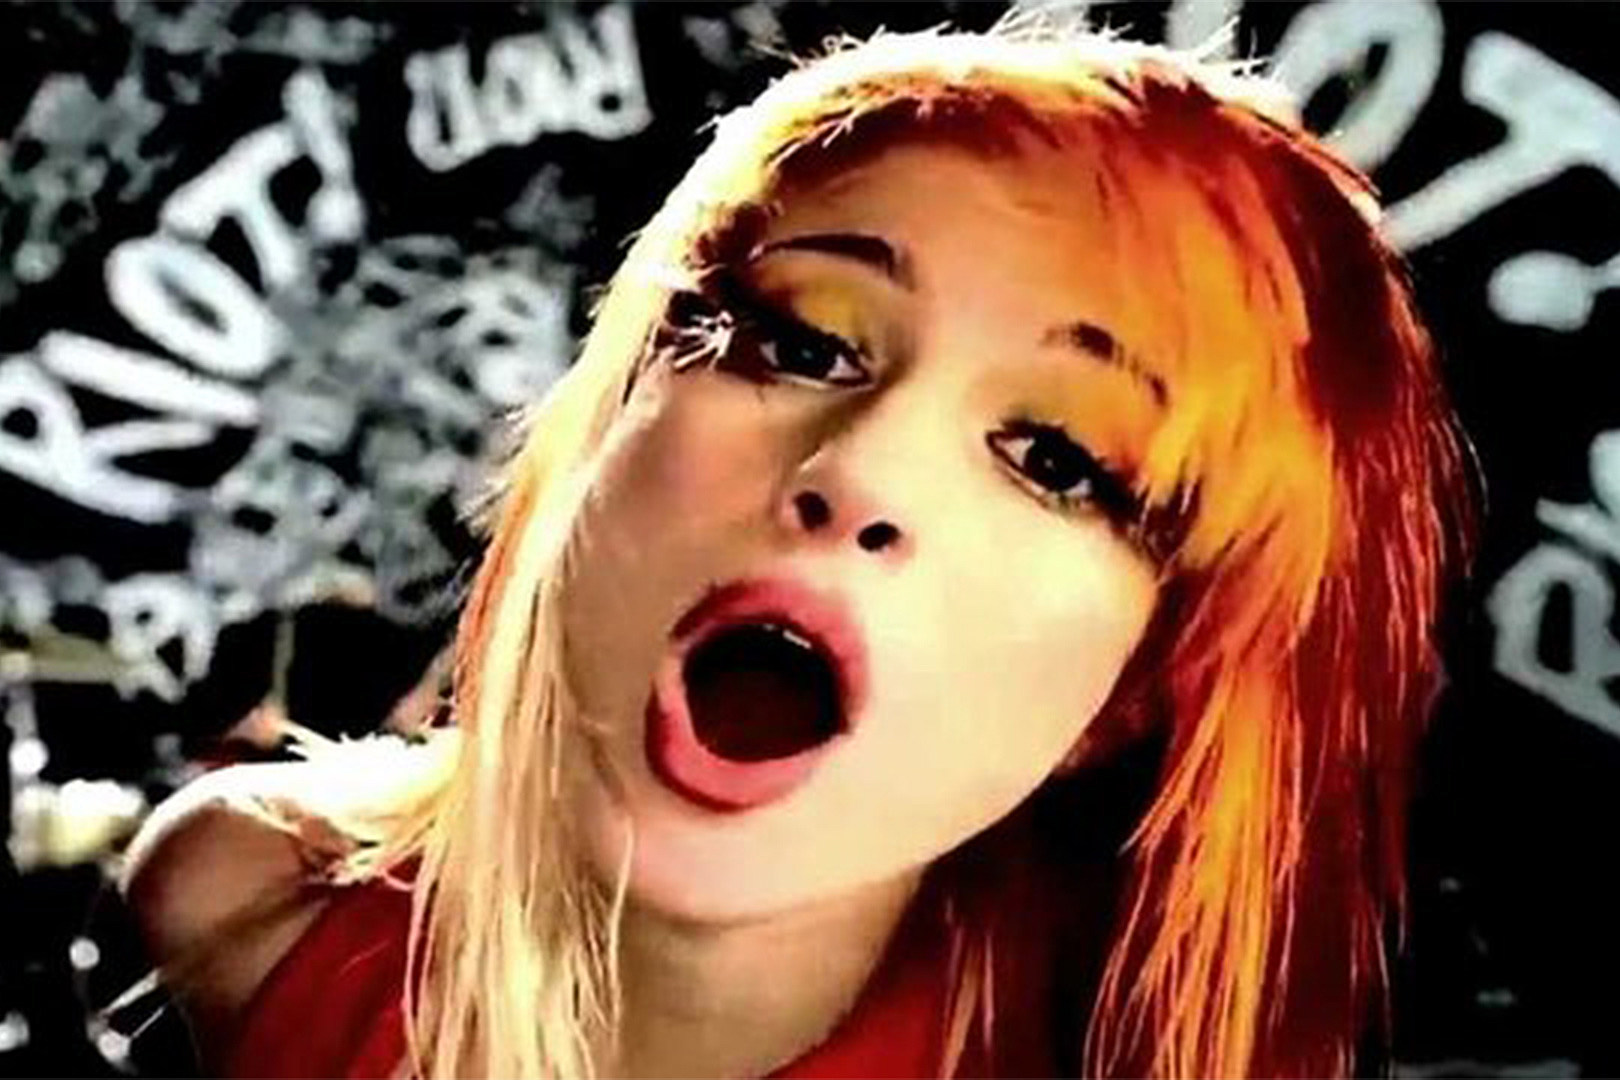 hayley williams before paramore